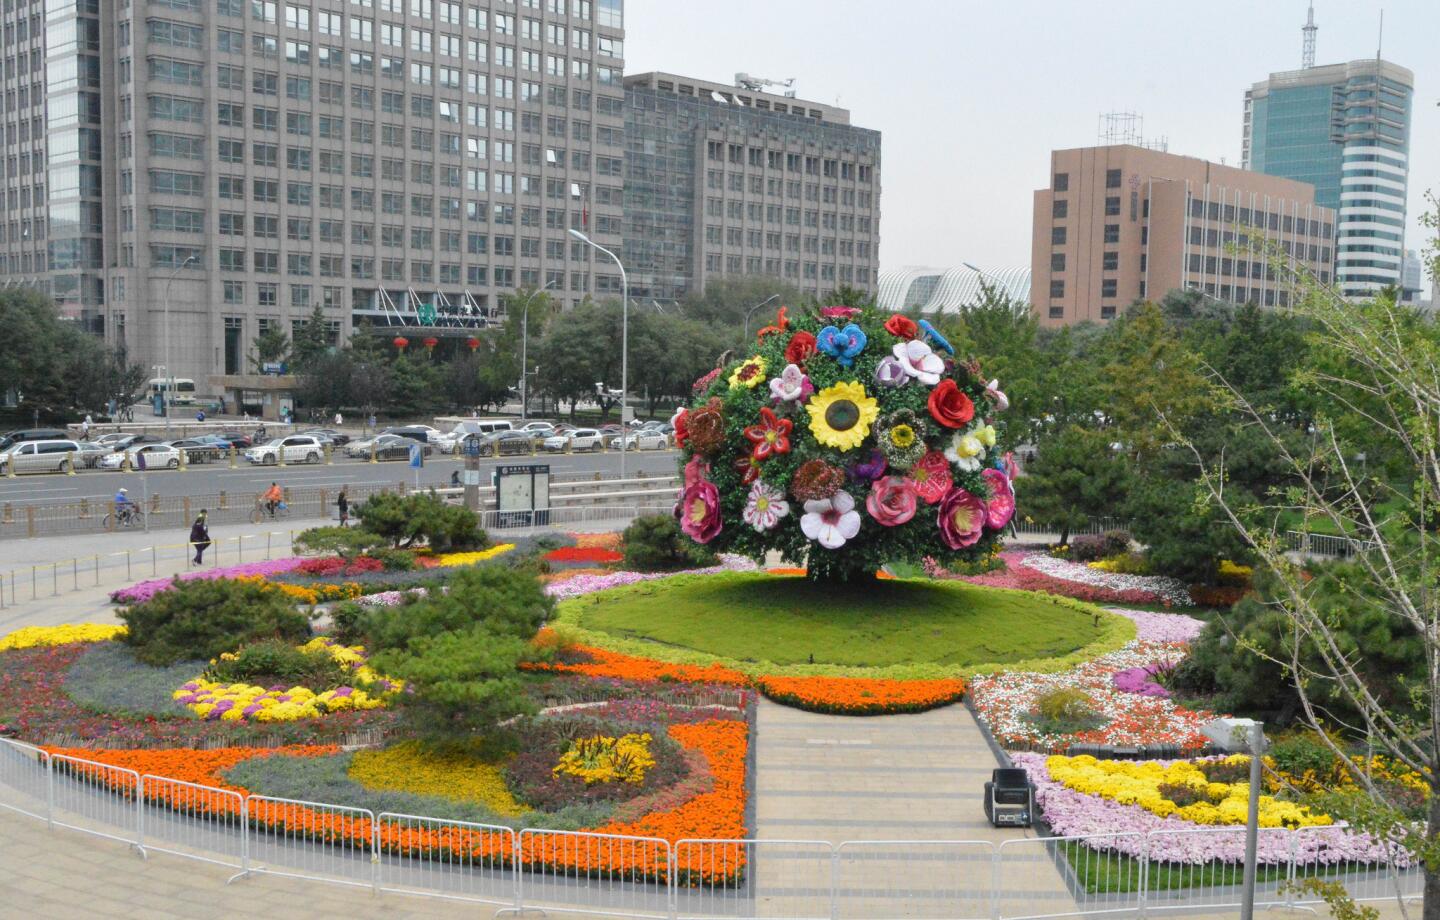 A giant floral display in central Beijing.